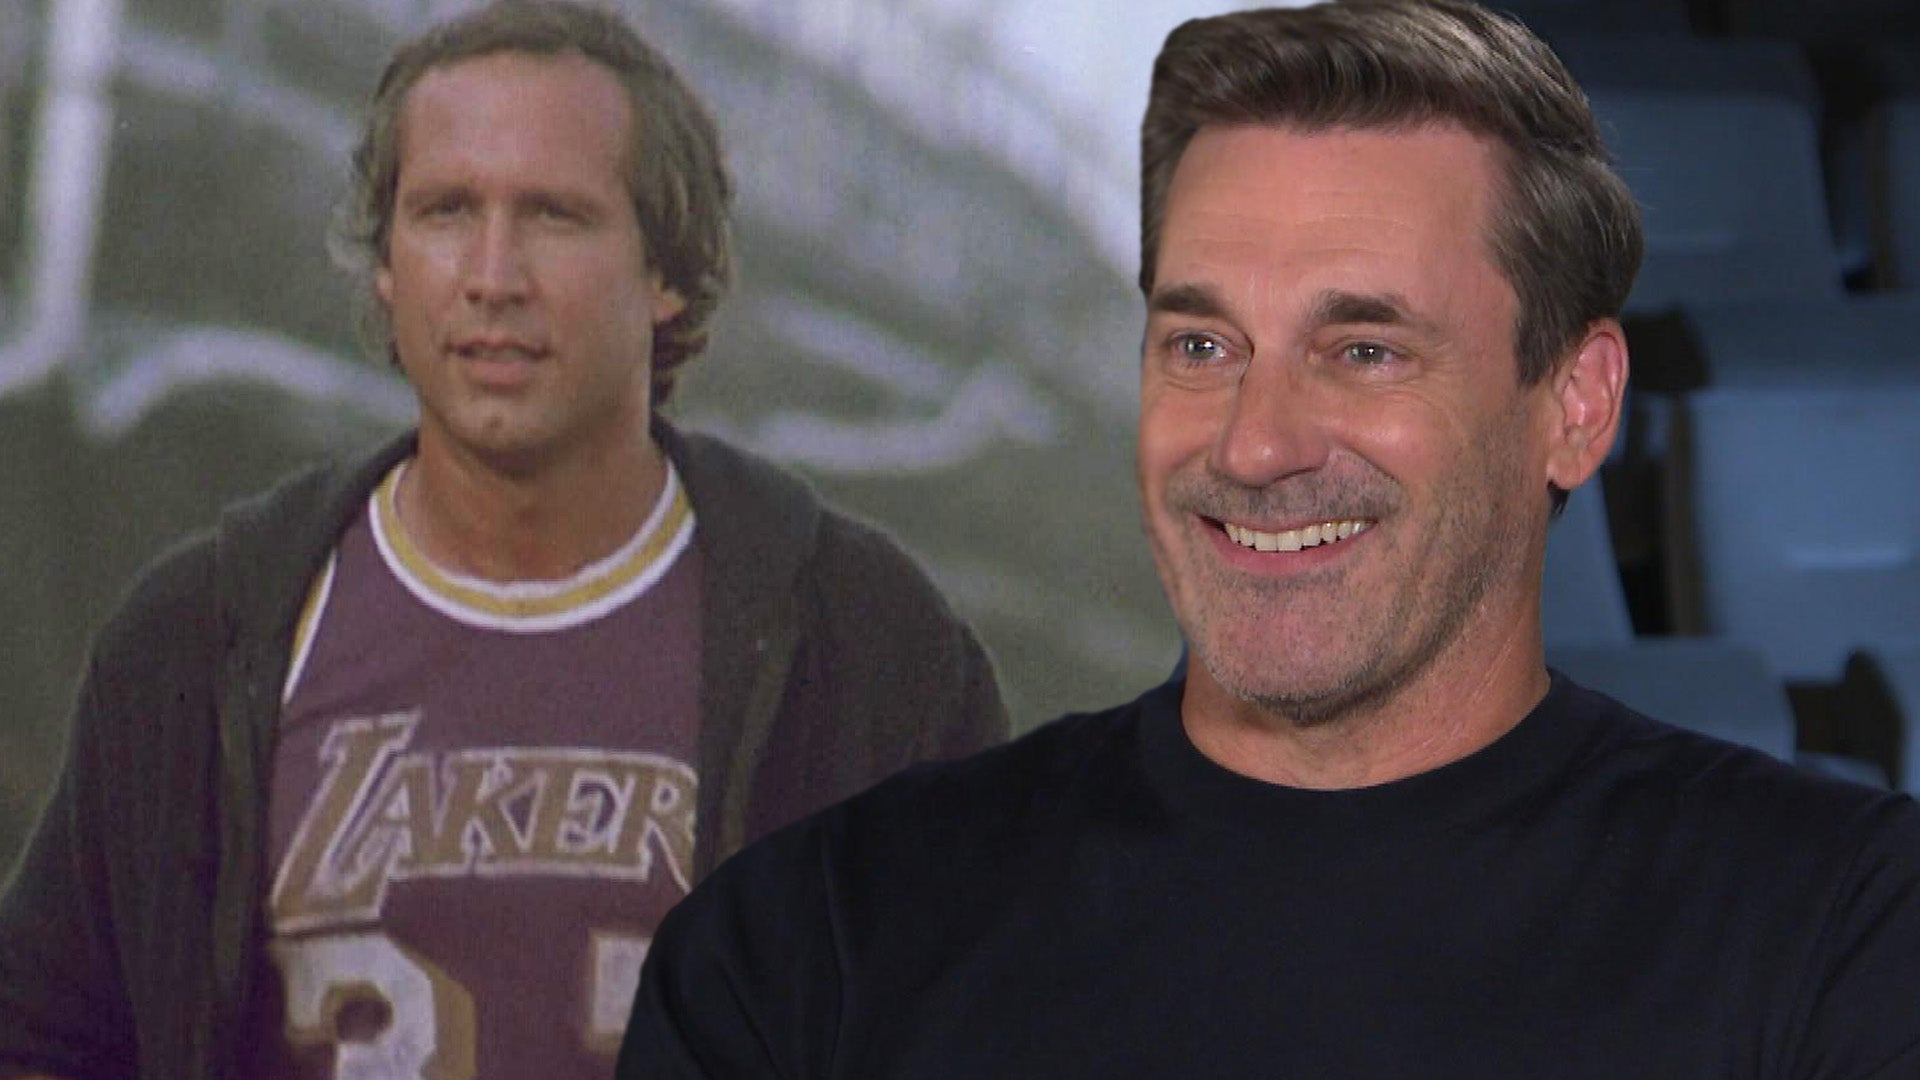 Meet the Real-Life Friends Who Inspired 'Tag' Movie Starring Jon Hamm 